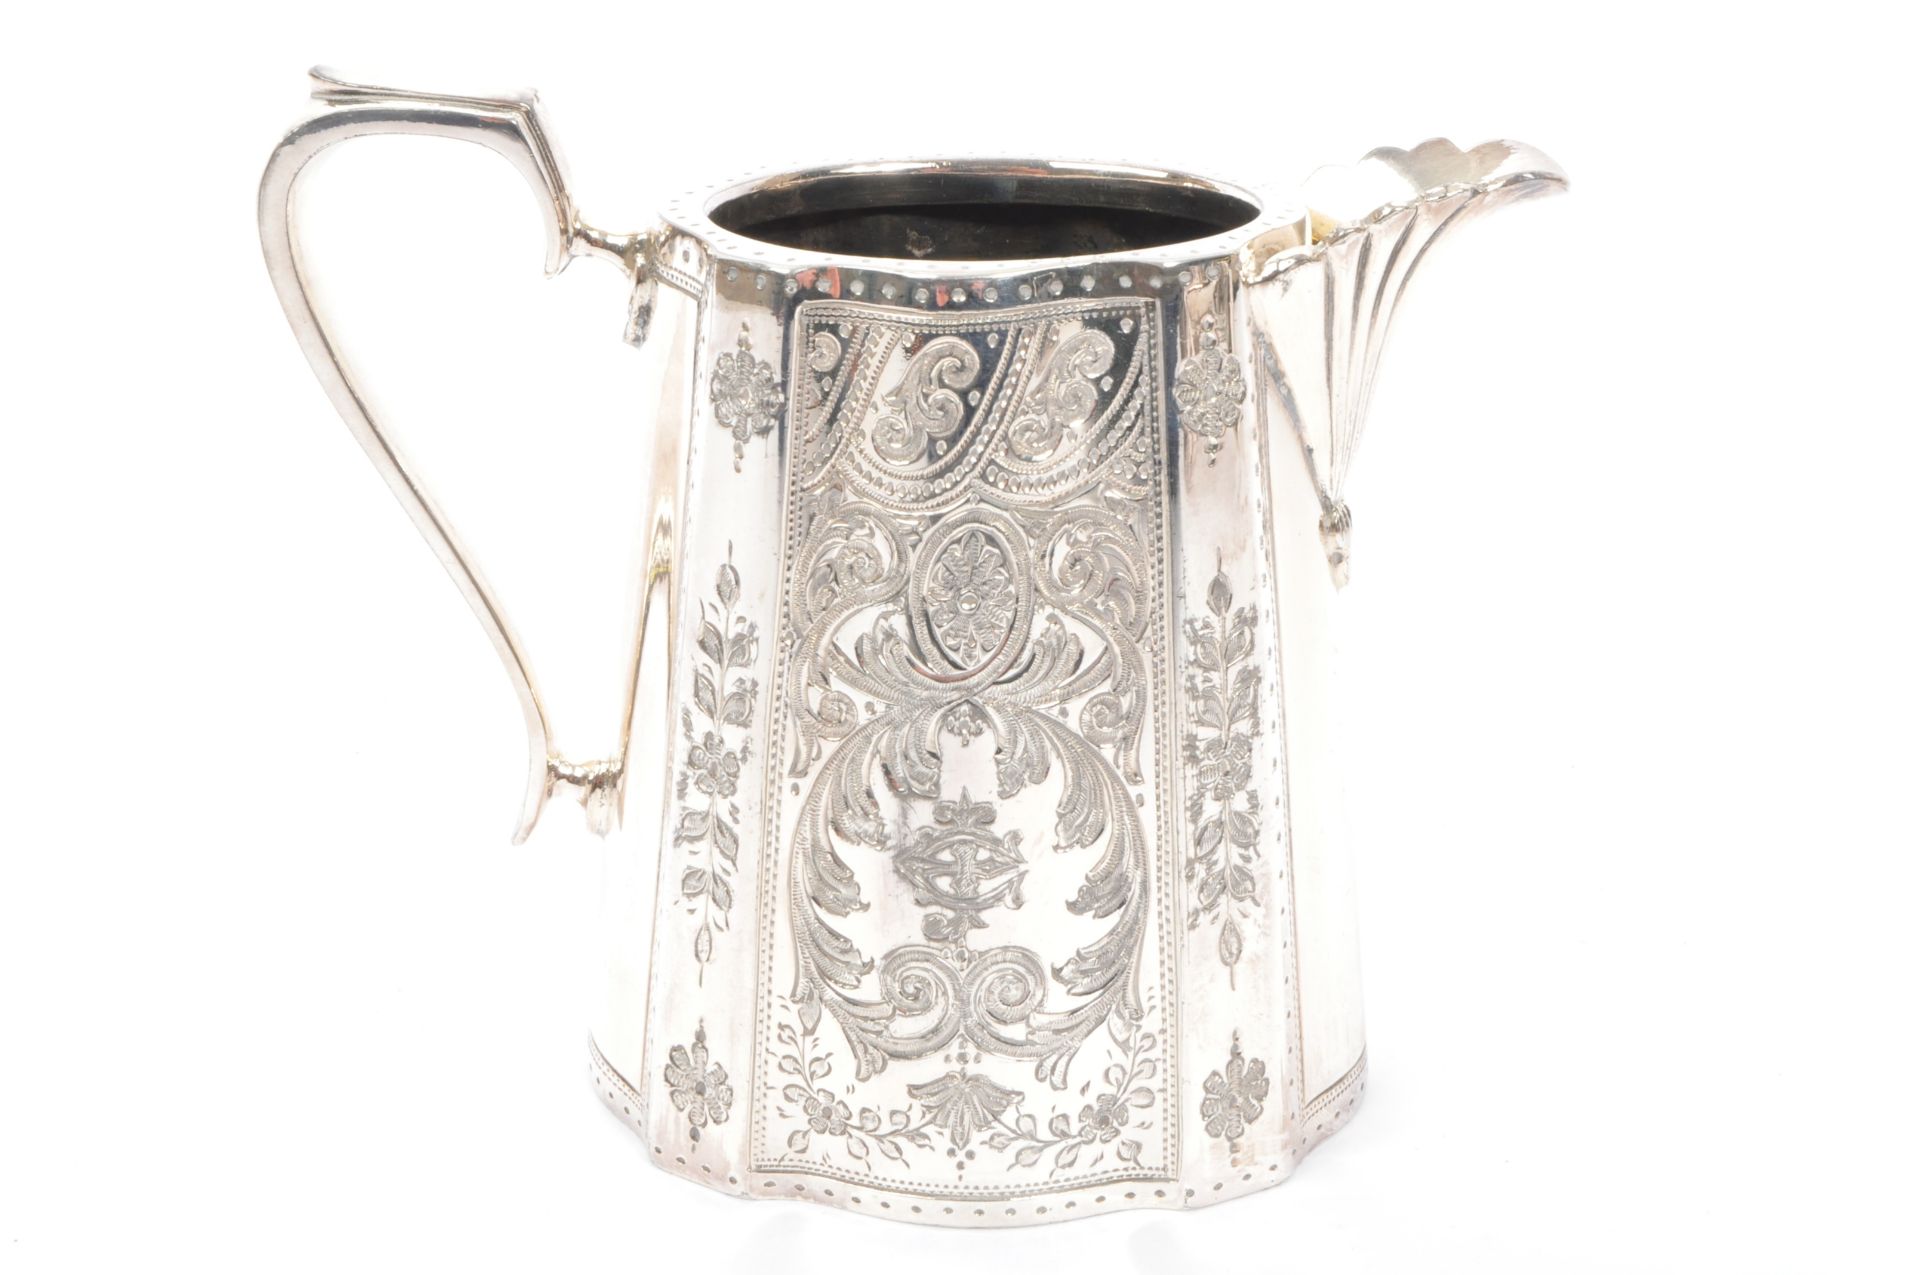 EARLY 20TH CENTURY WALKER & HALL, SHEFFIELD SILVER PLATED ITEMS - Image 6 of 7